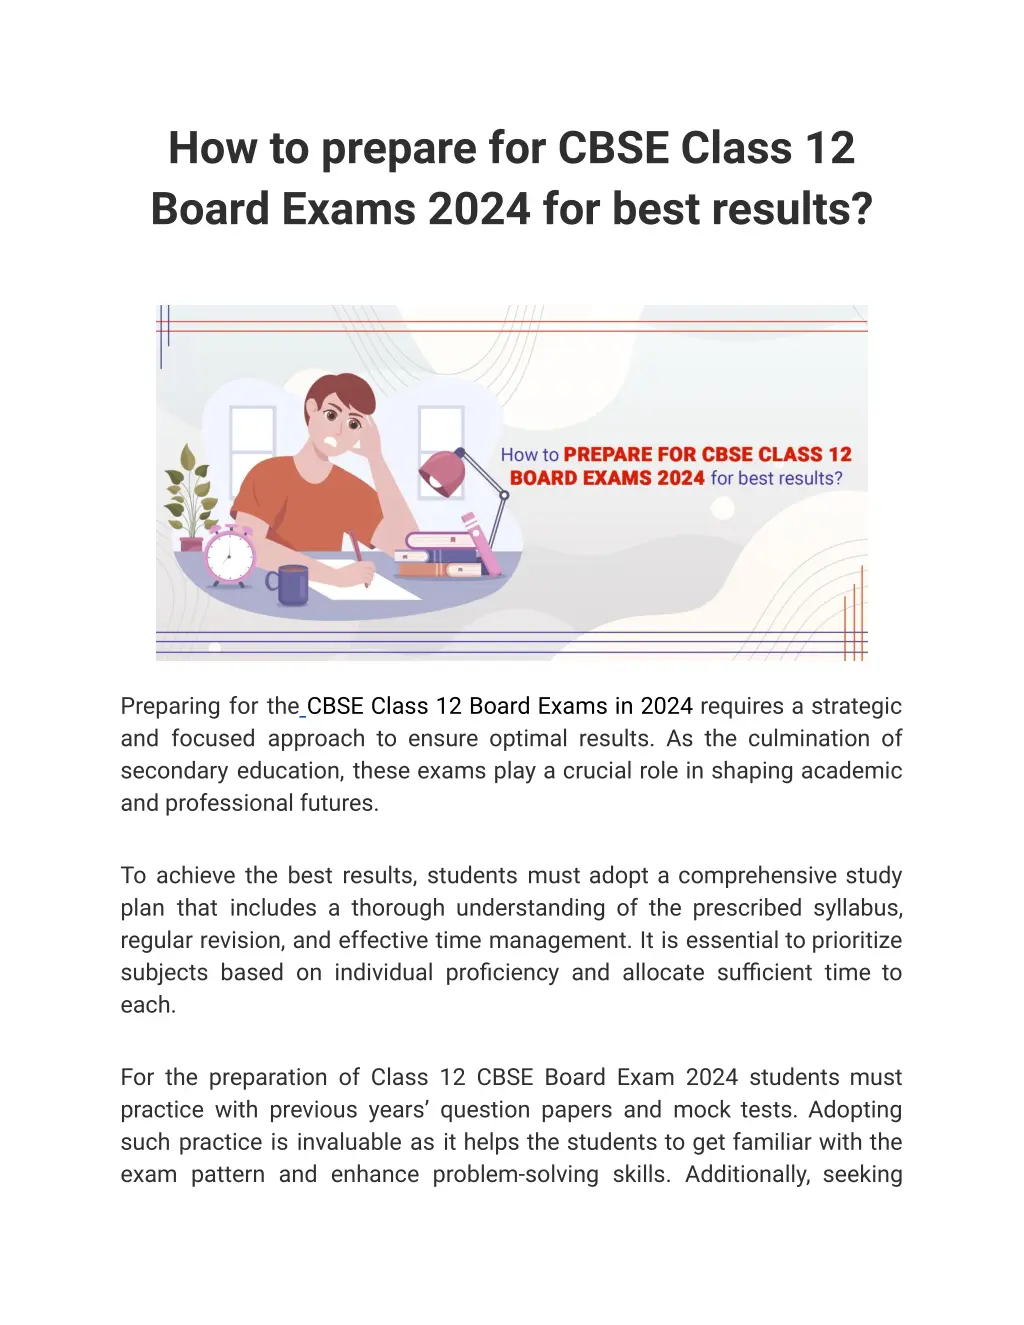 how to prepare for cbse class 12 board exams 2024 n.